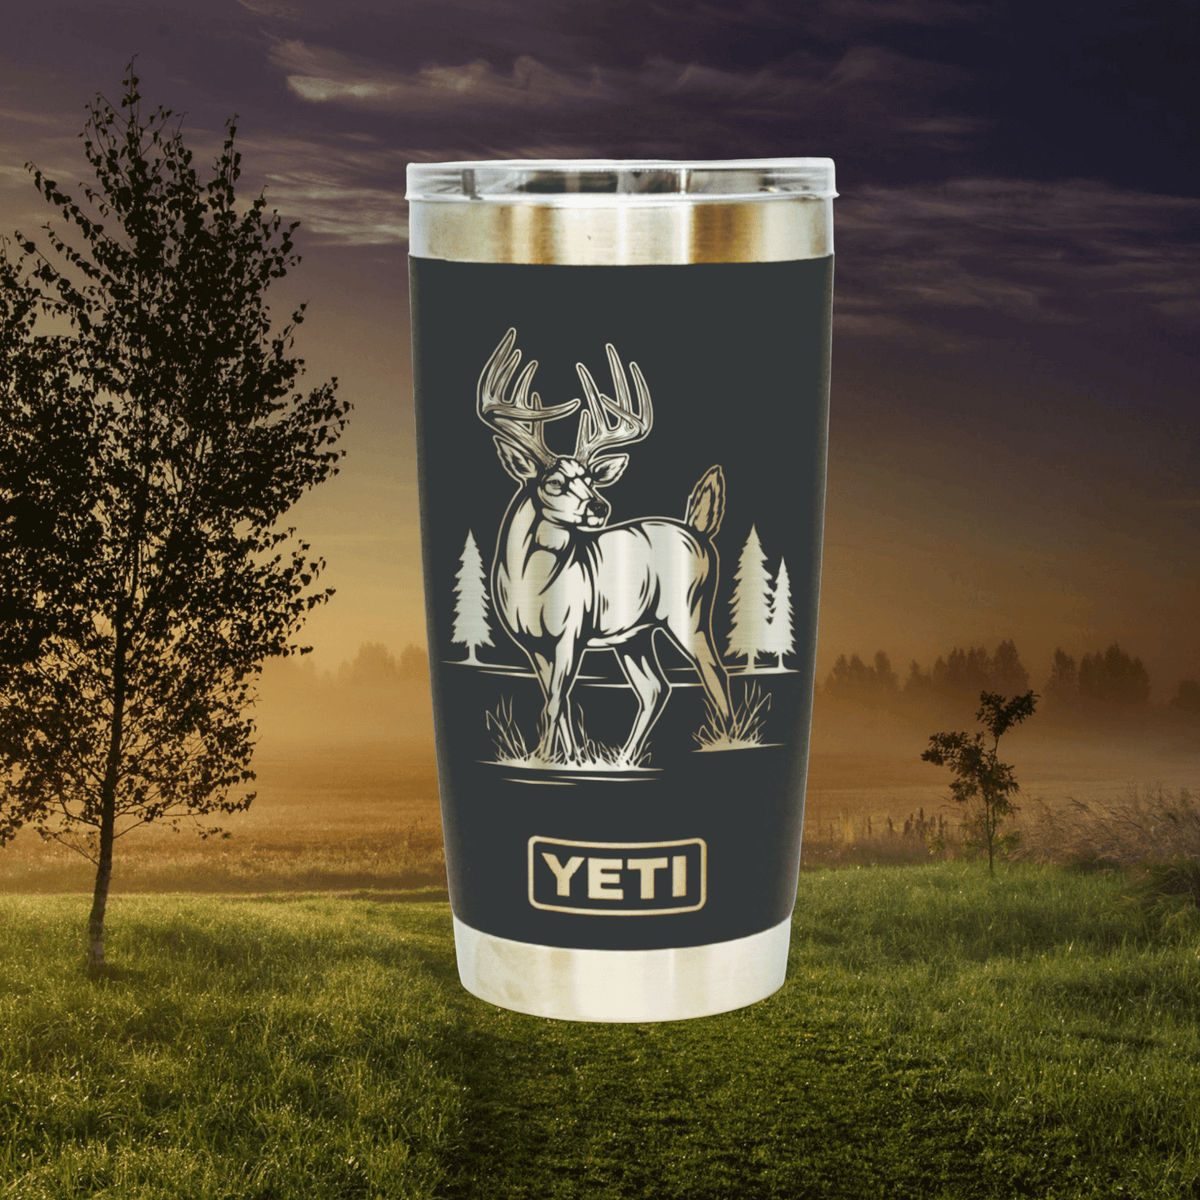 https://cdn.shopify.com/s/files/1/0606/5497/7184/products/wind-river_outpost_whitetail_deer-yeti-midwest-background_1200x.png?v=1690330954